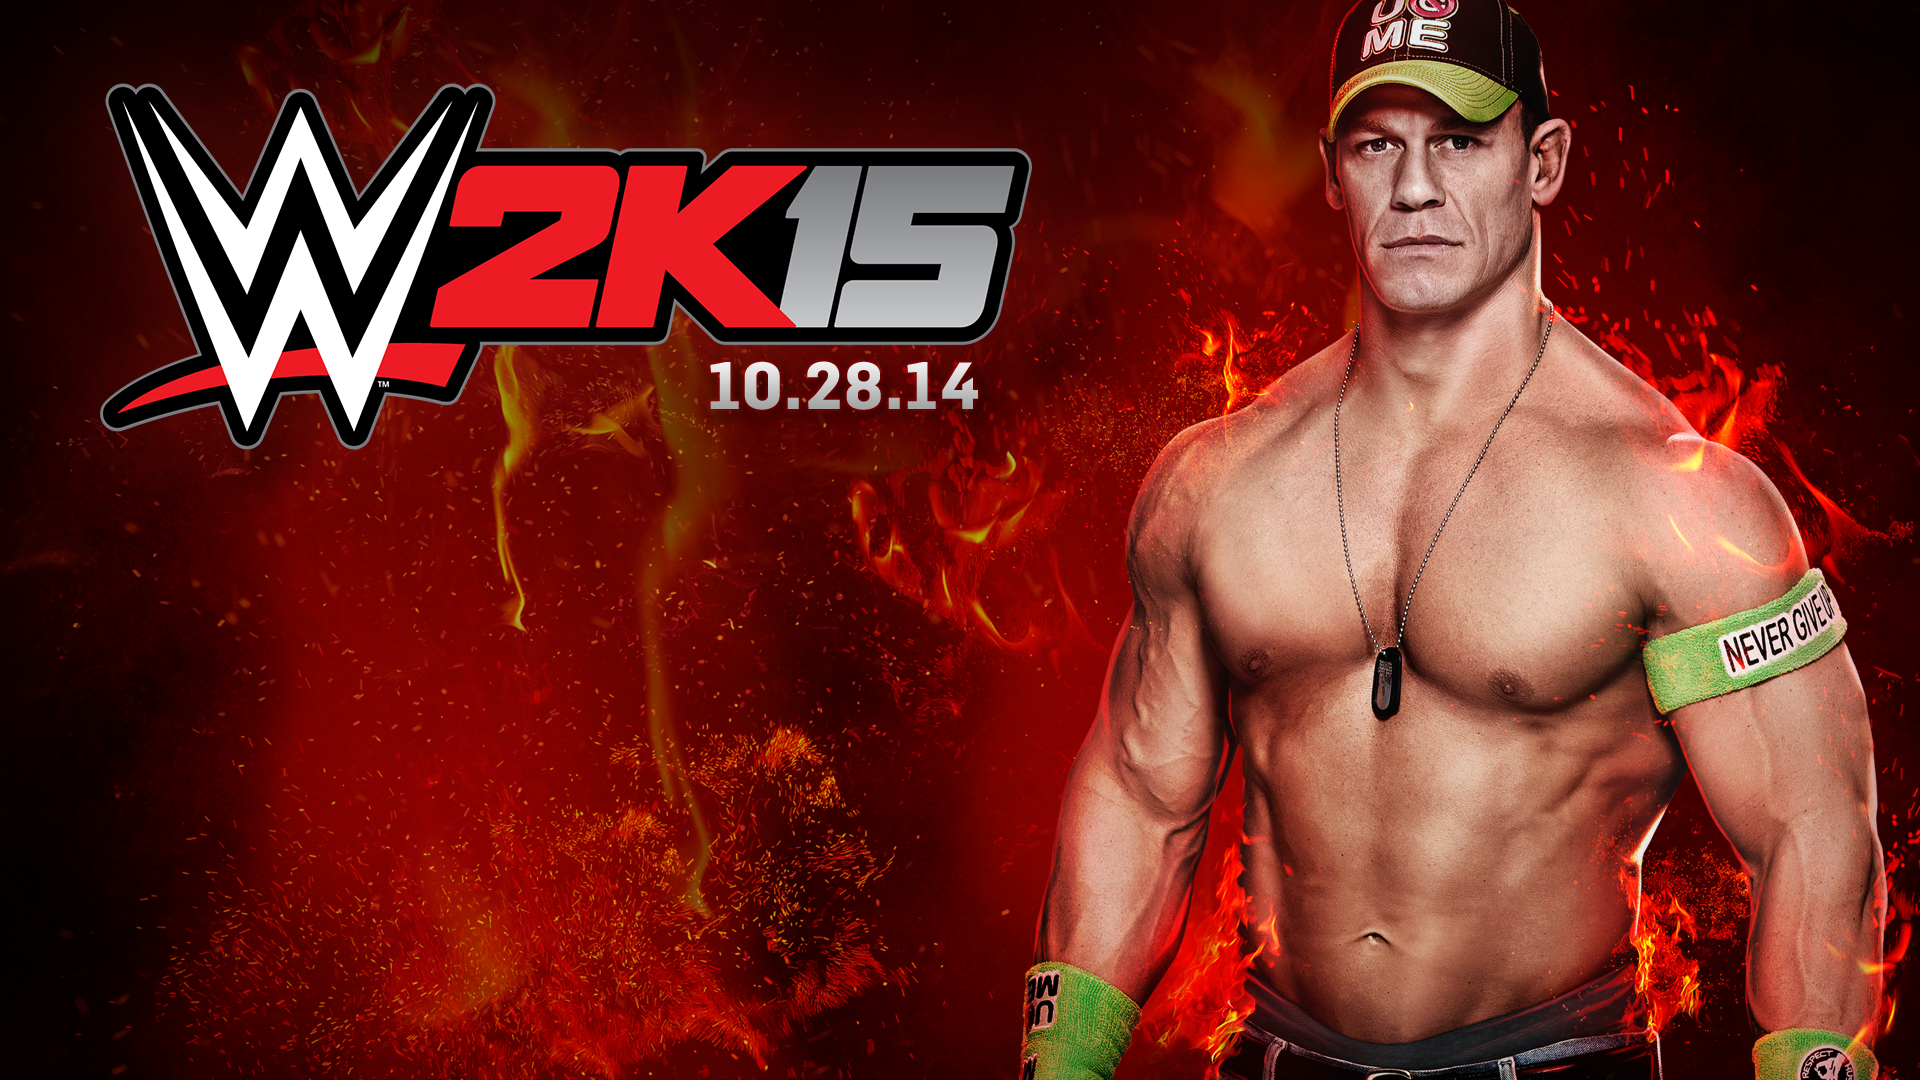 WWE 2K15 Backgrounds, Compatible - PC, Mobile, Gadgets| 1920x1080 px